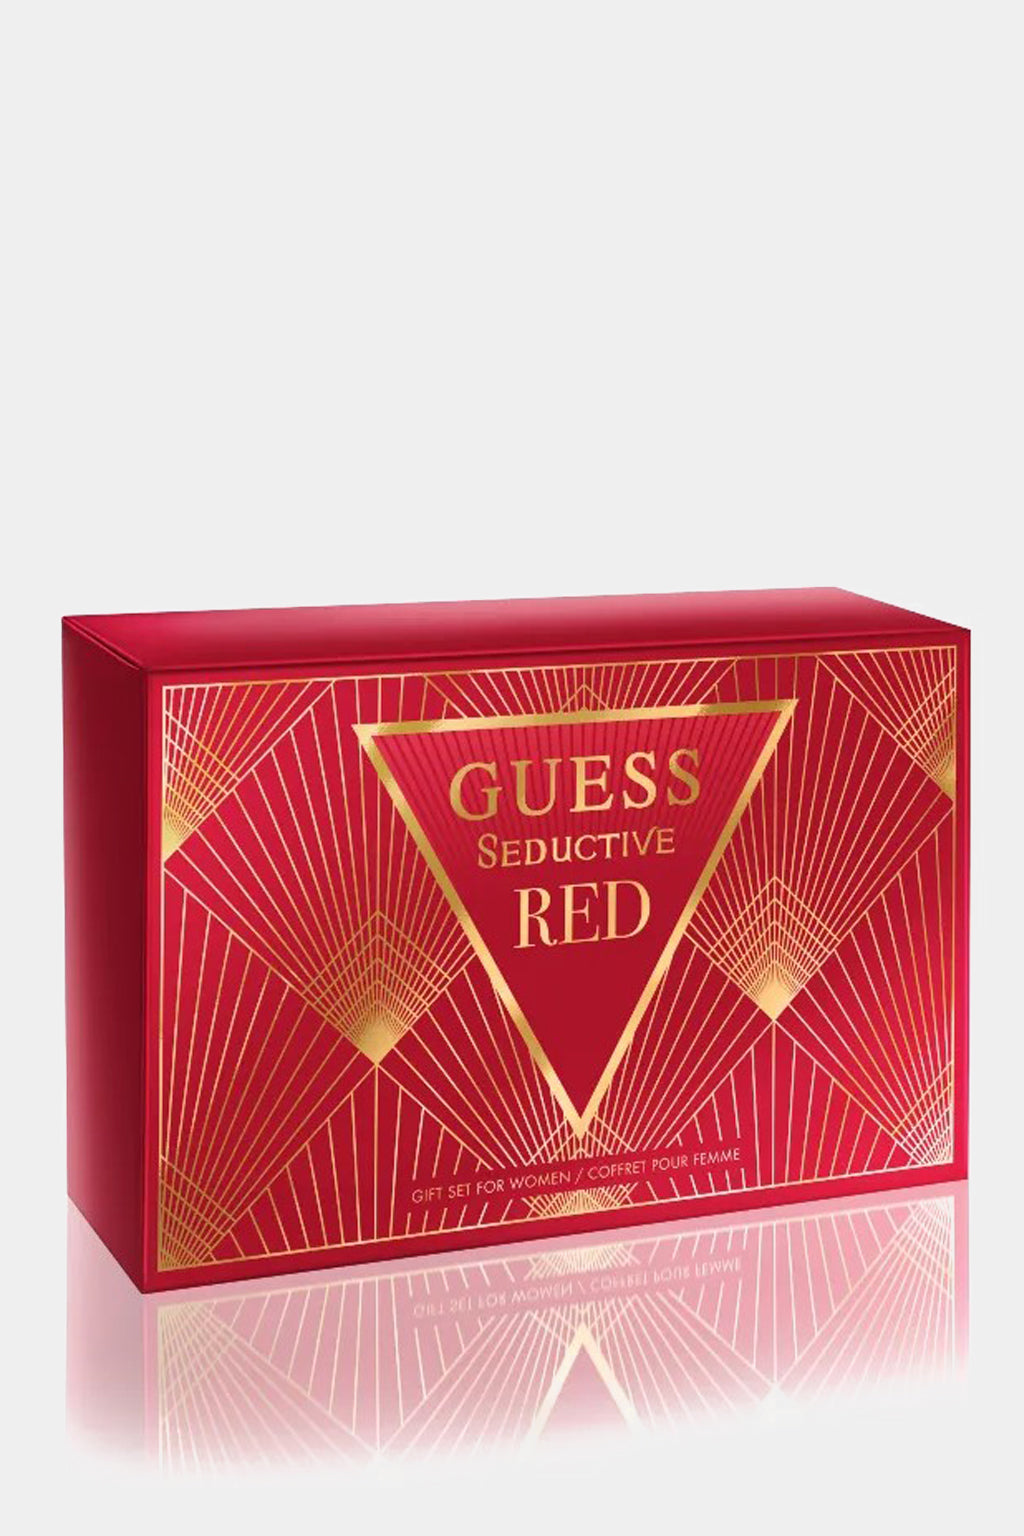 Guess - Seductive Red gift set for women 3 products